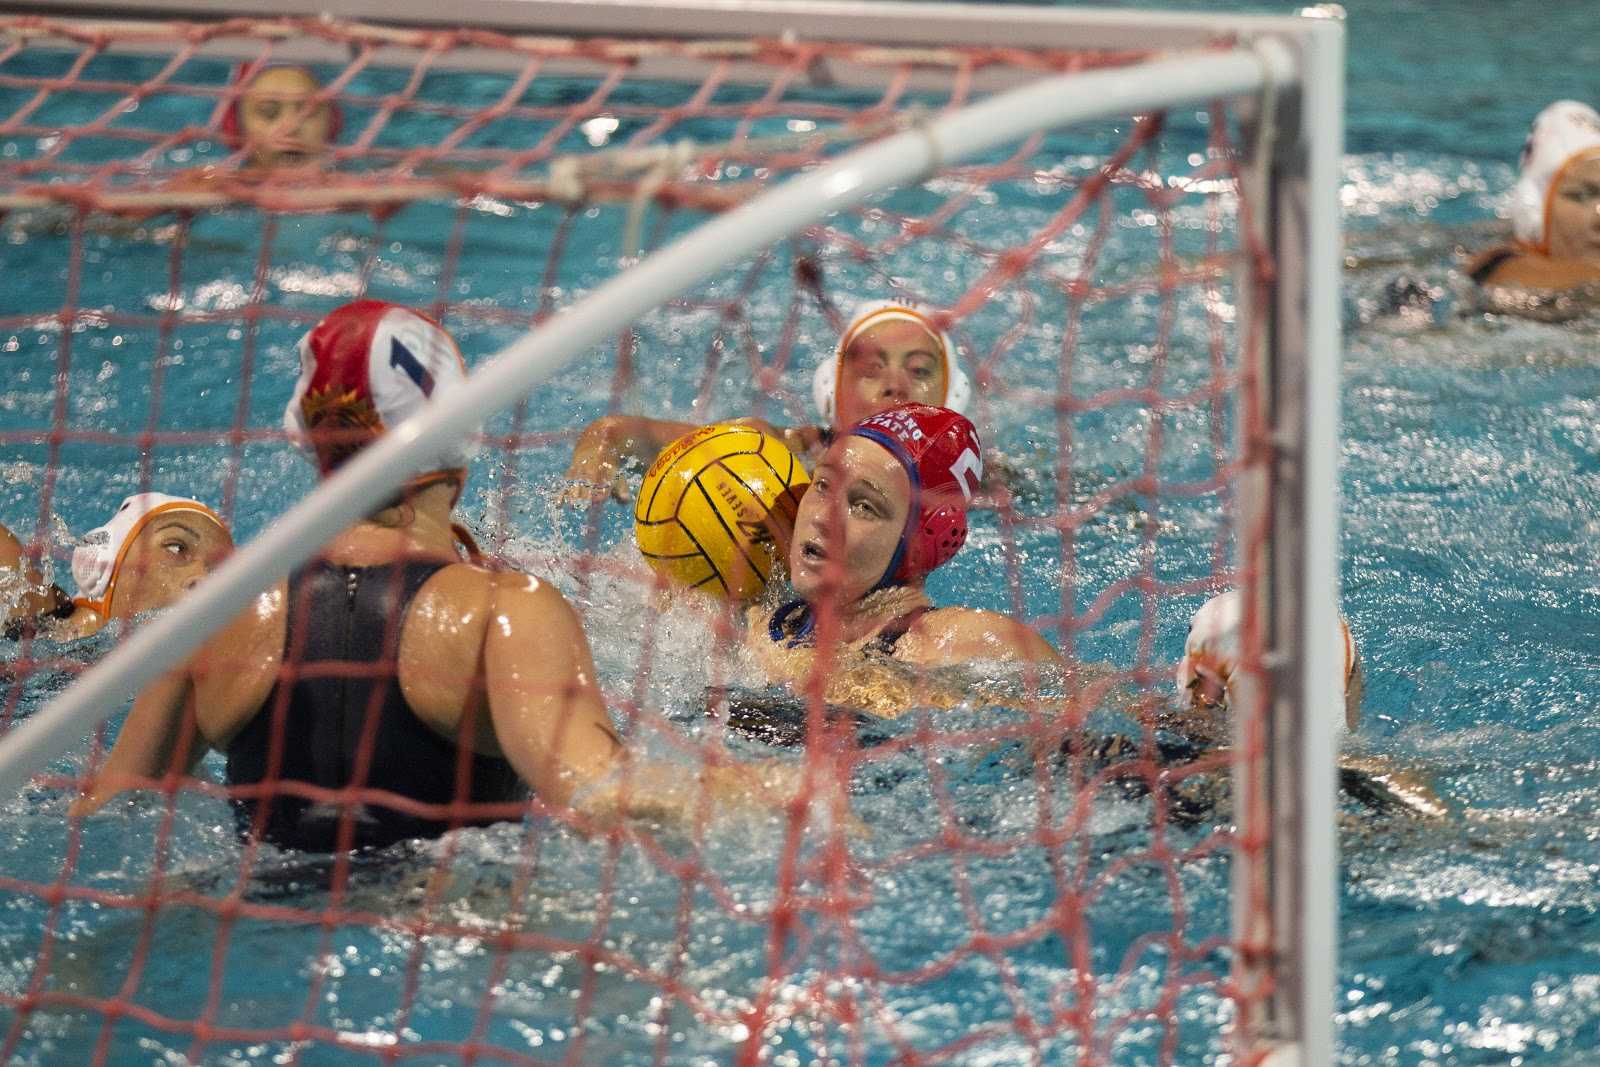 Fresno+State+water+polo+player+Emily+Nicholson+gets+ready+to+shoot+while+surrounded+by+Fresno+Pacific+University+players+during+a+home+match+on+Friday%2C+Feb.+8%2C+2019.